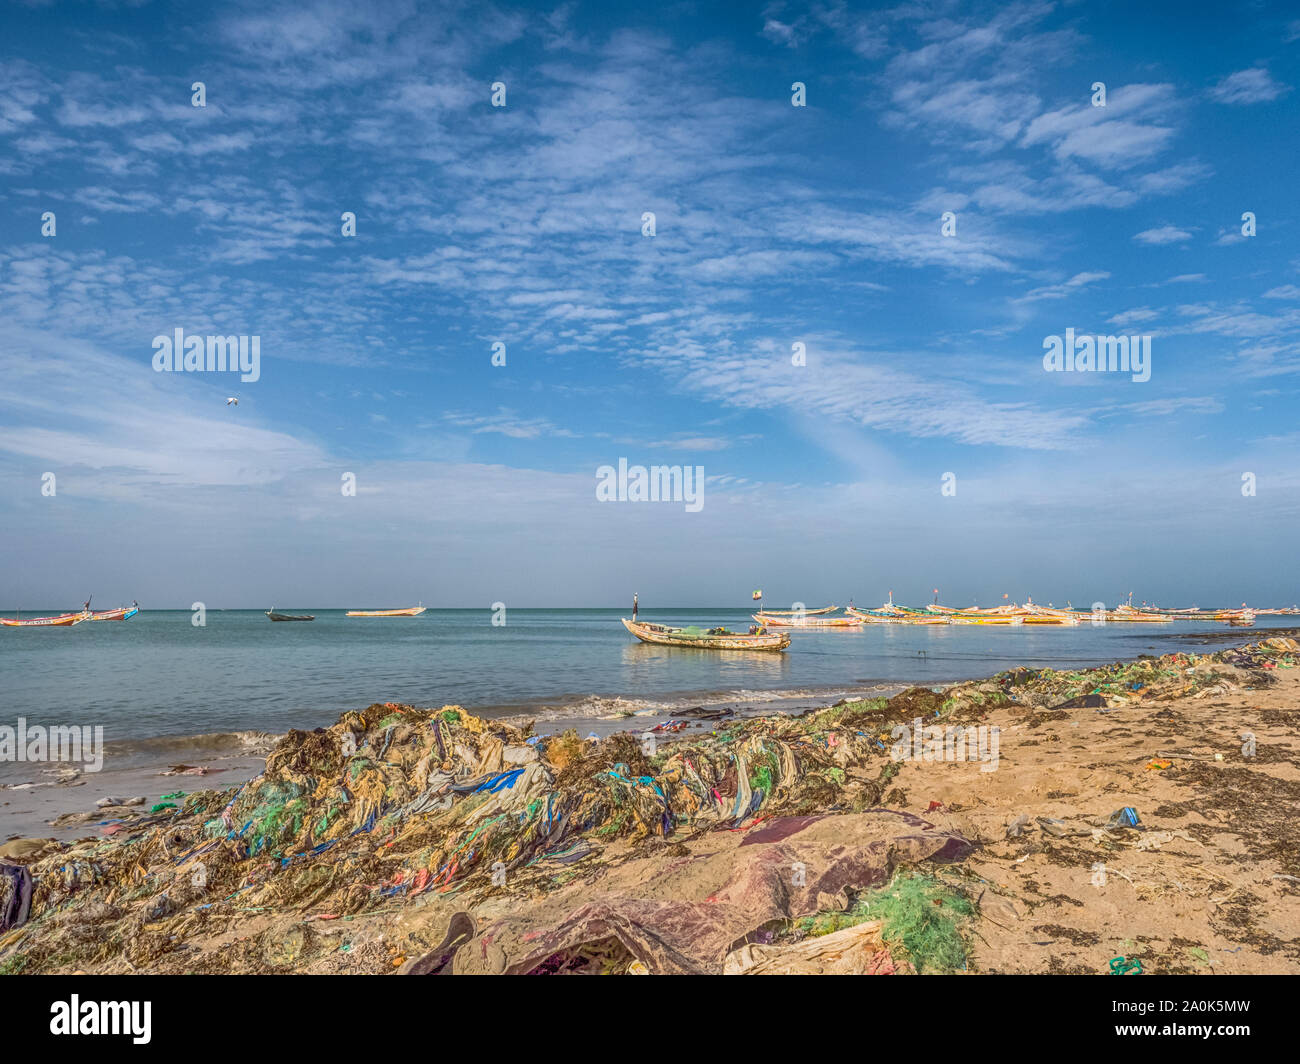 Senegal, Africa - January 26, 2019: Plenty of plastic bags on shore of the ocean. Pollution concept. Colorful fisher boats in the background. Senegal. Stock Photo